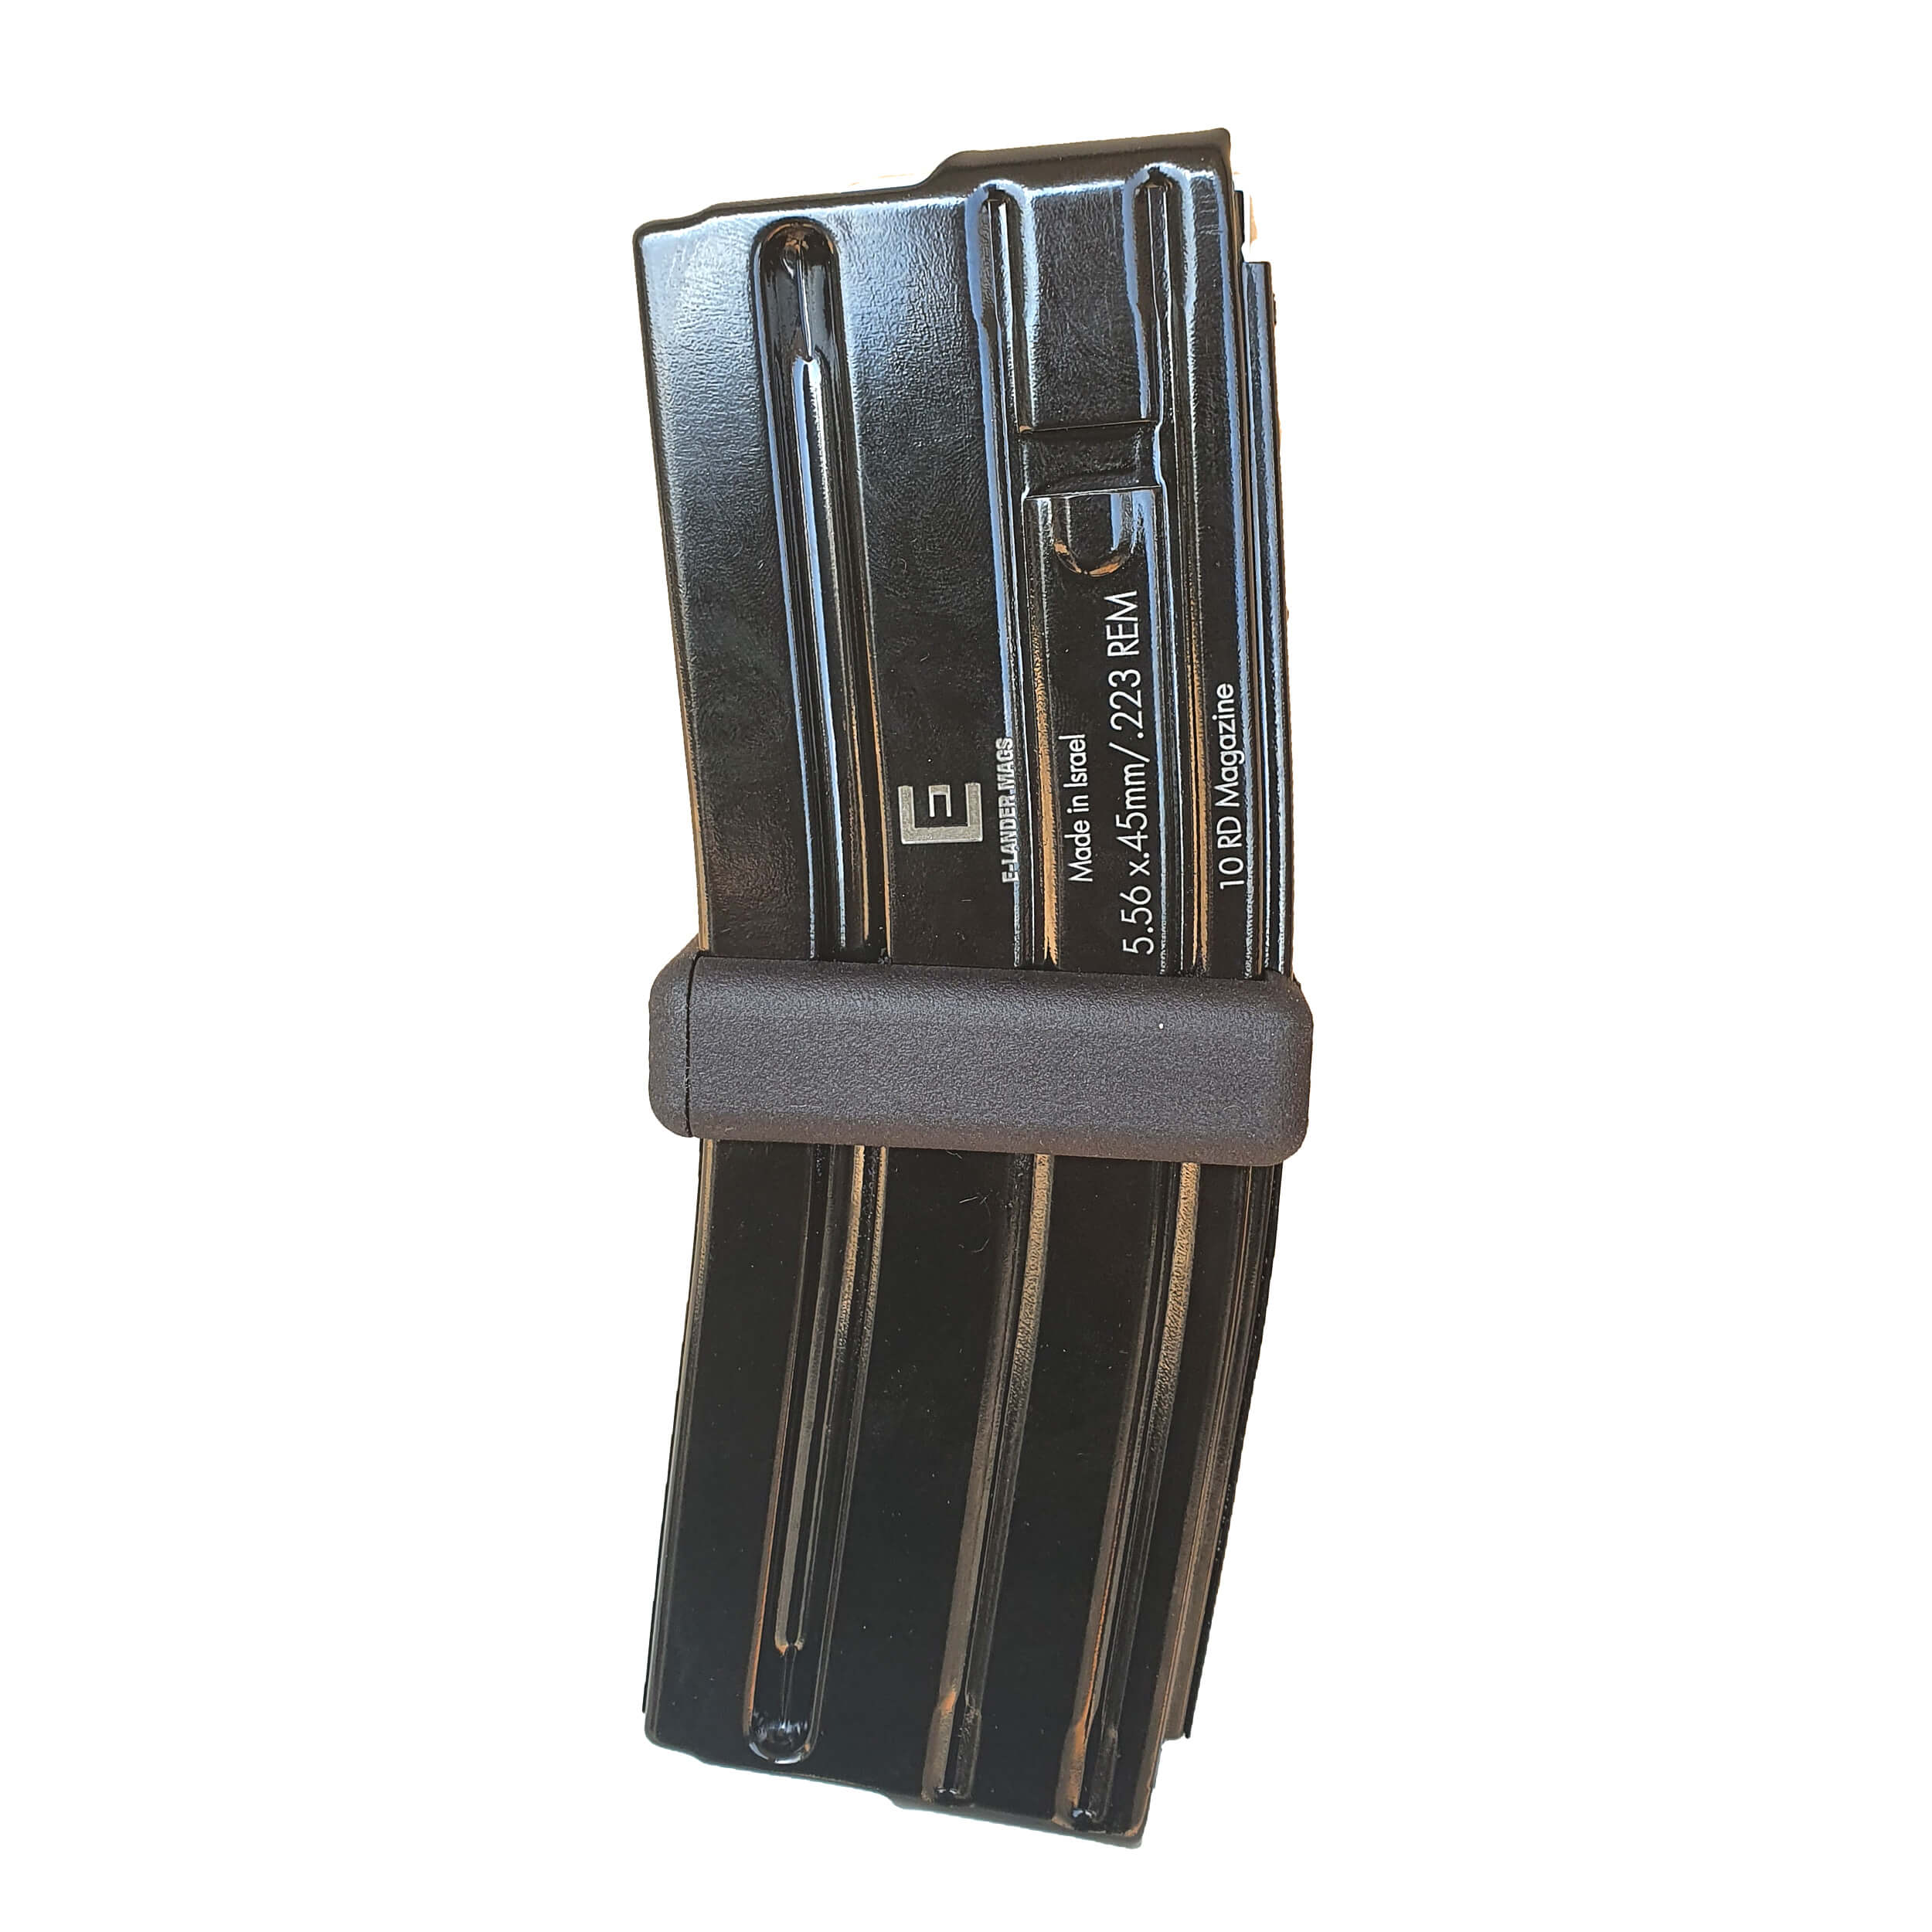 ISS Protectiontrade Magazine Coupler with 2X E-Lander 10R 5.56 x 45 mm / .223 REM Steel Magazines